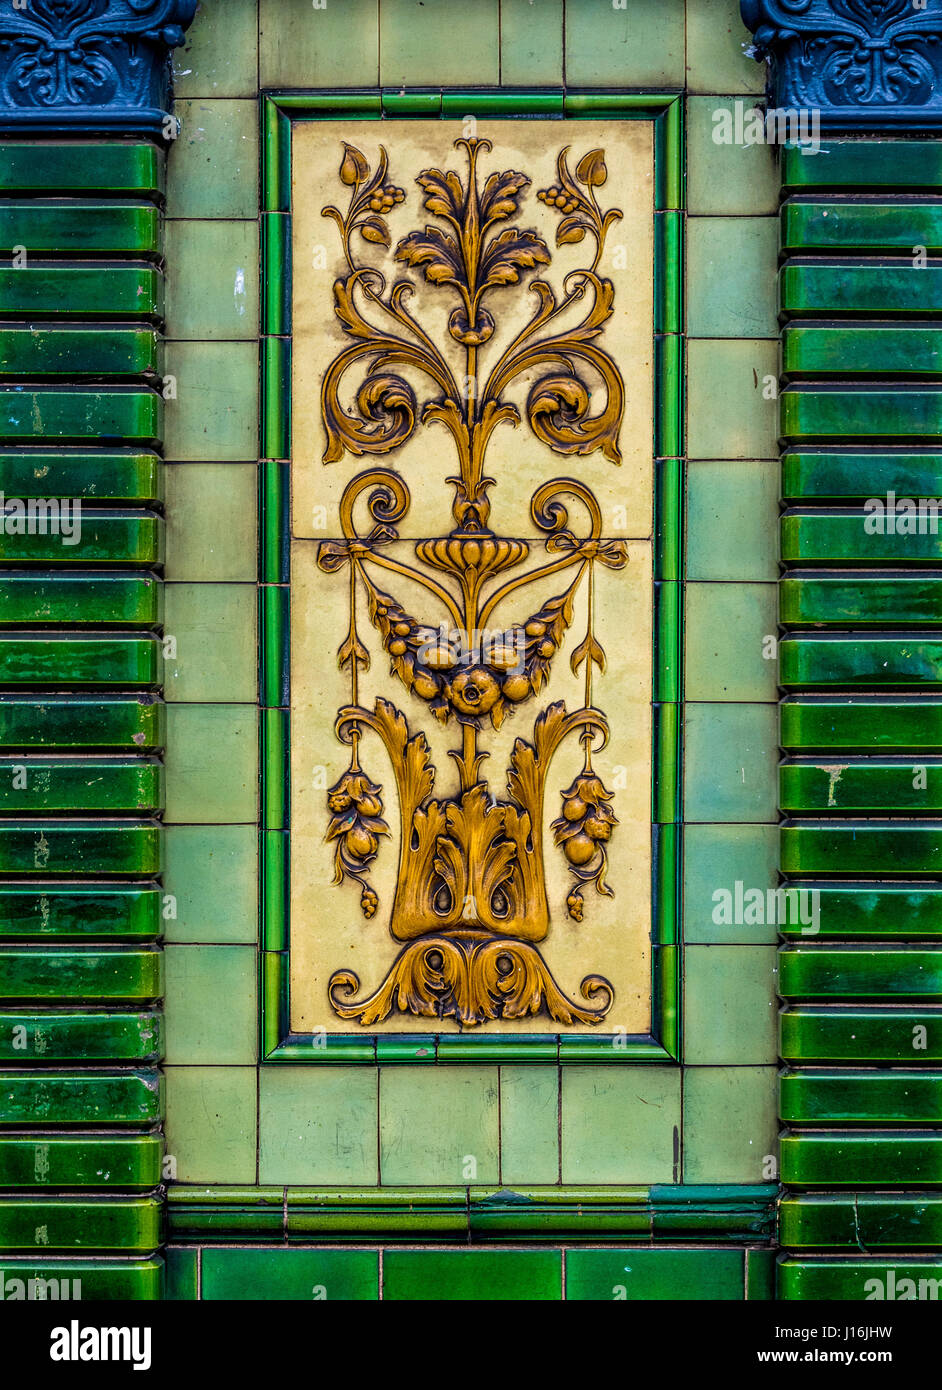 Green tiles on exterior of Humber Dock Bar and Grill, formerly the Green Bricks Pub, Humber Dock street, Hull, UK. Stock Photo